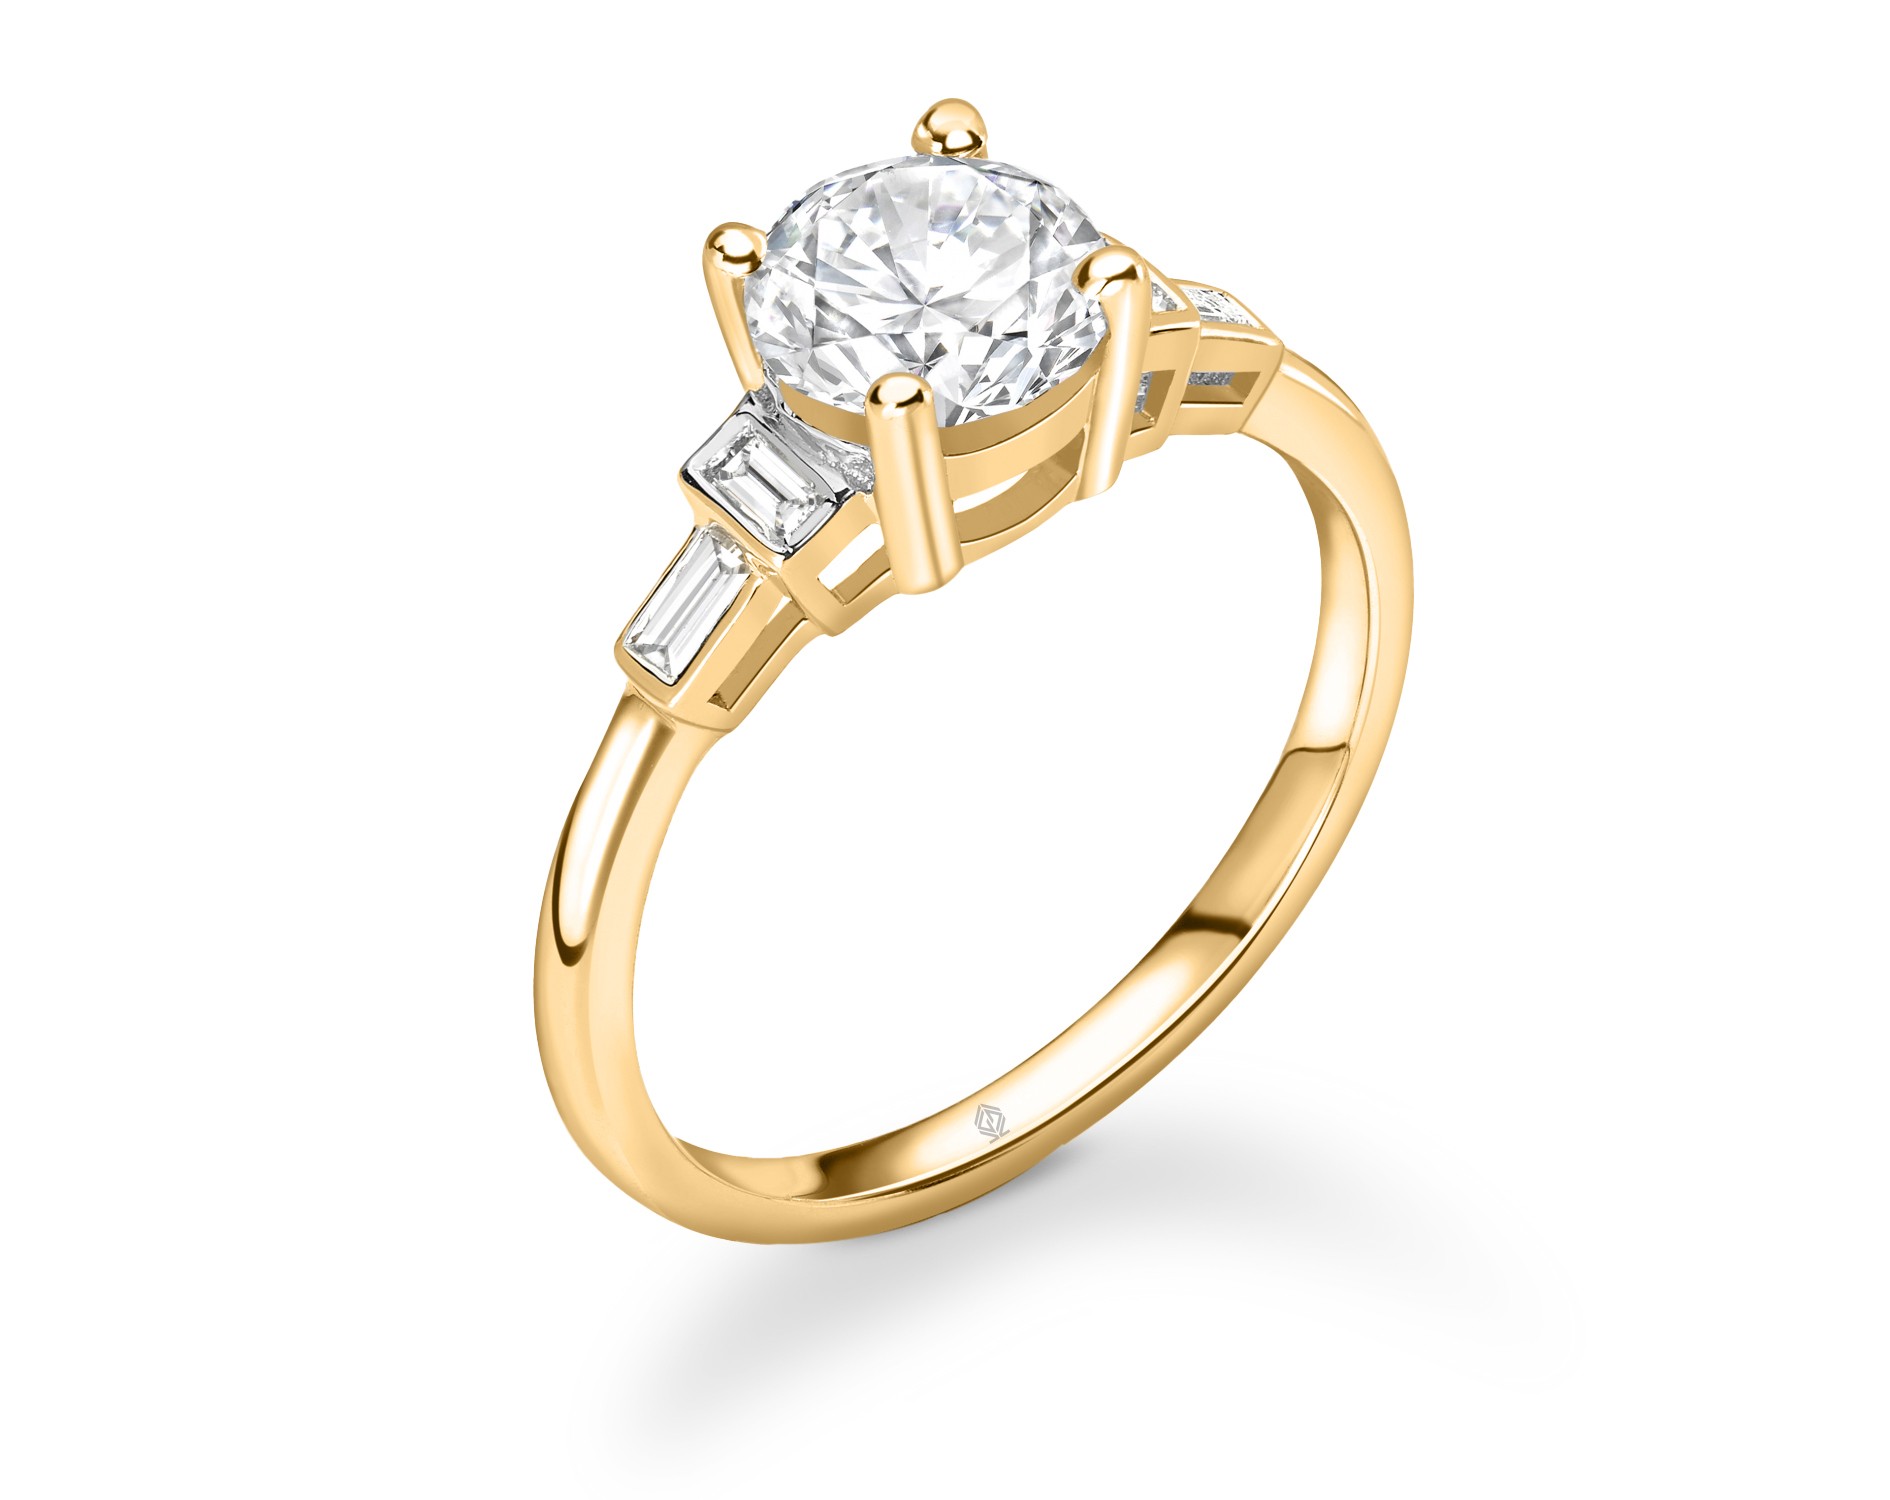 18K YELLOW GOLD ROUND CUT 4 PRONGS DIAMOND ENGAGEMENT RING WITH BAGUETTES CUT SIDE STONES